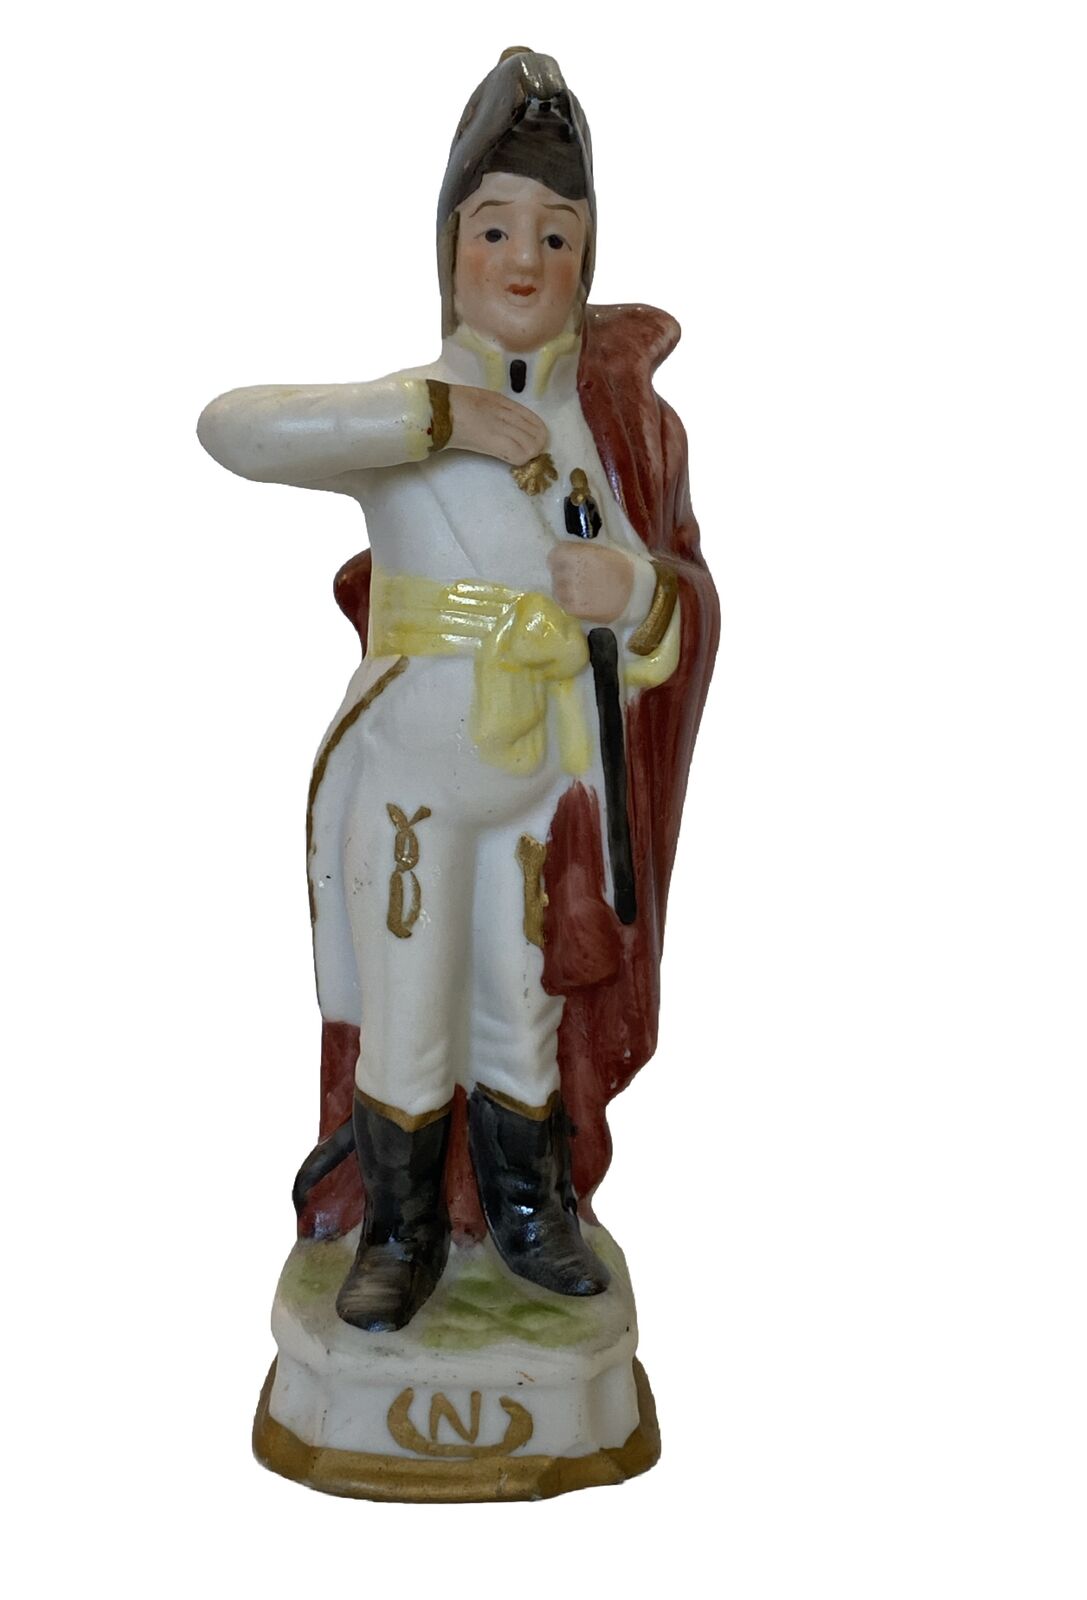 VINTAGE NAPOLEON SOLDIER FIGURINE 7.75 “ FADED STAMP HAND MADE & PAINTED